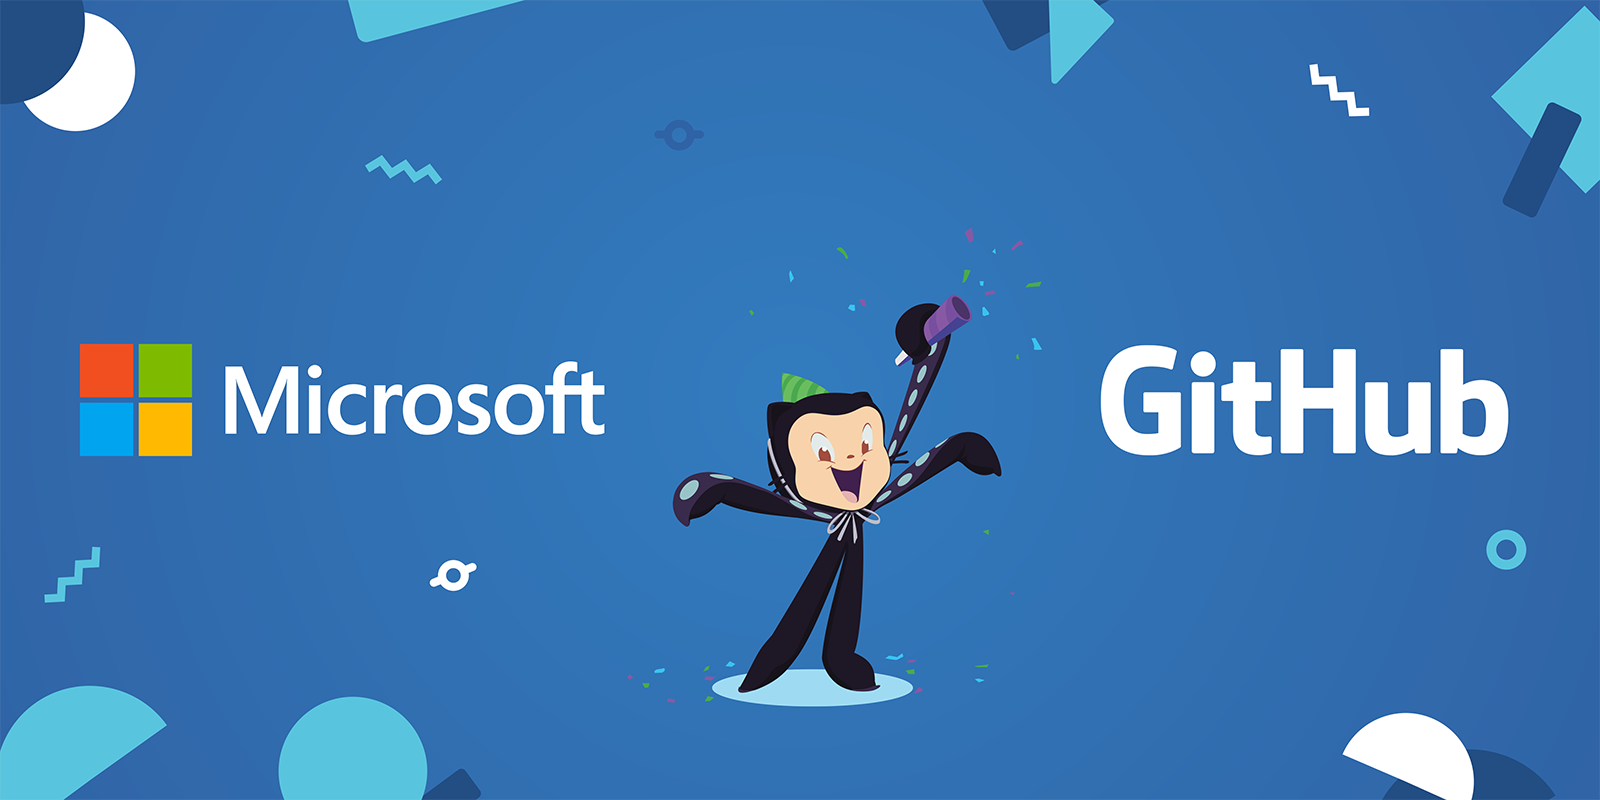 Microsoft celebrates the agreement to acquire GitHub